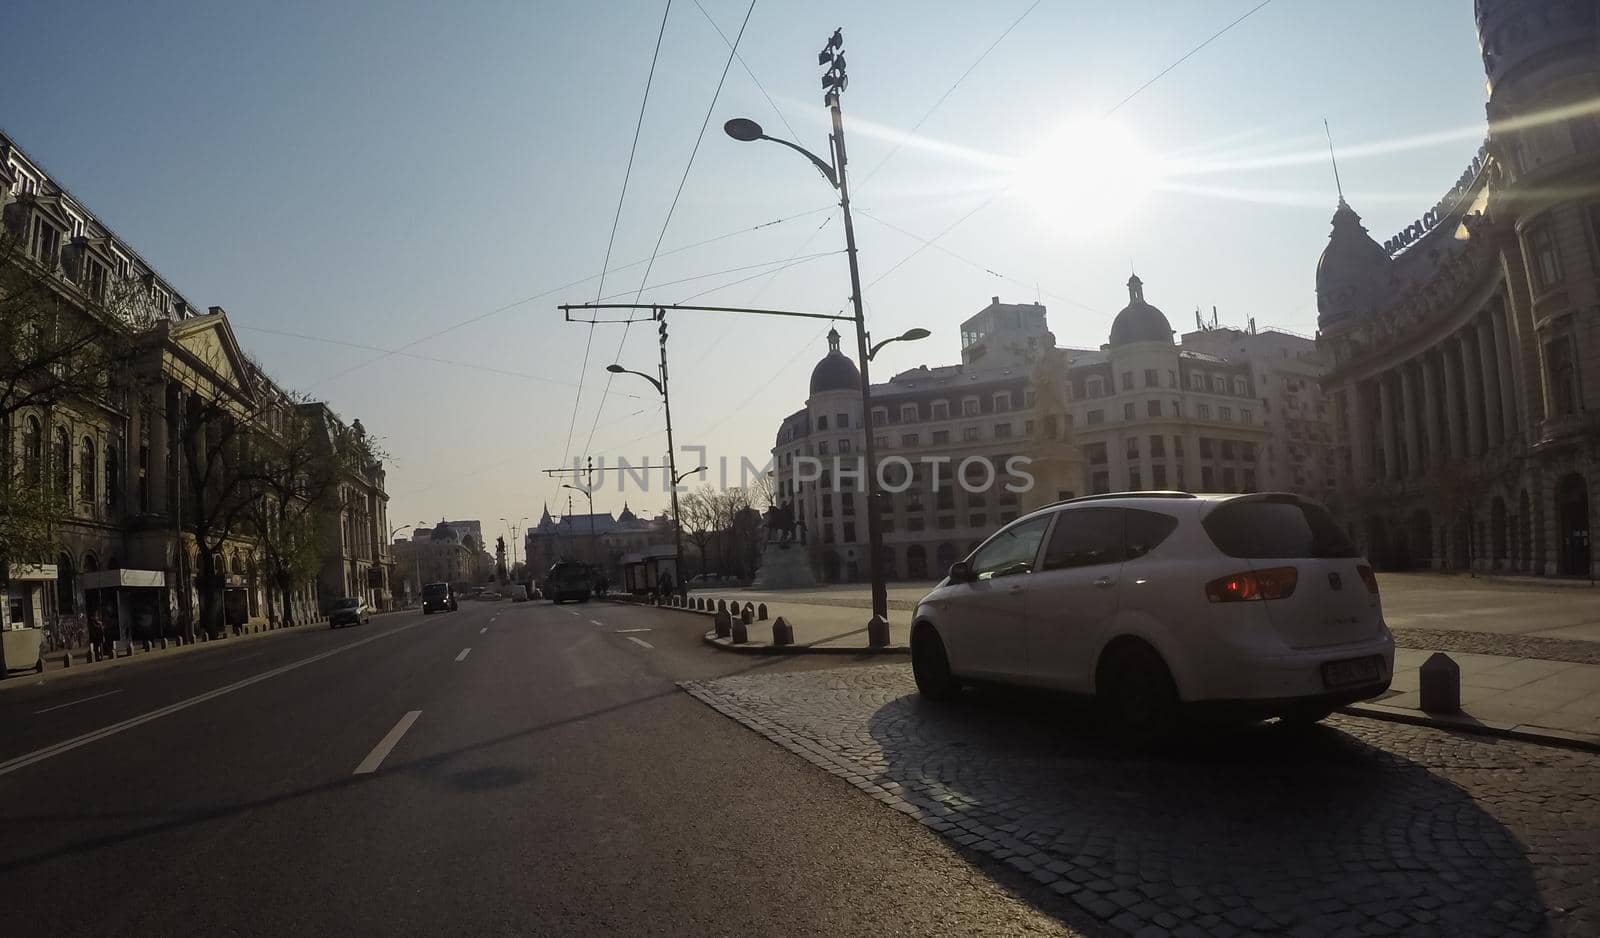 Changes and complications caused by coronavirus epidemy, world without crowds, virus empties streets. No traffic jam, no pollution, empty streets in downtown Bucharest, Romania, 2020